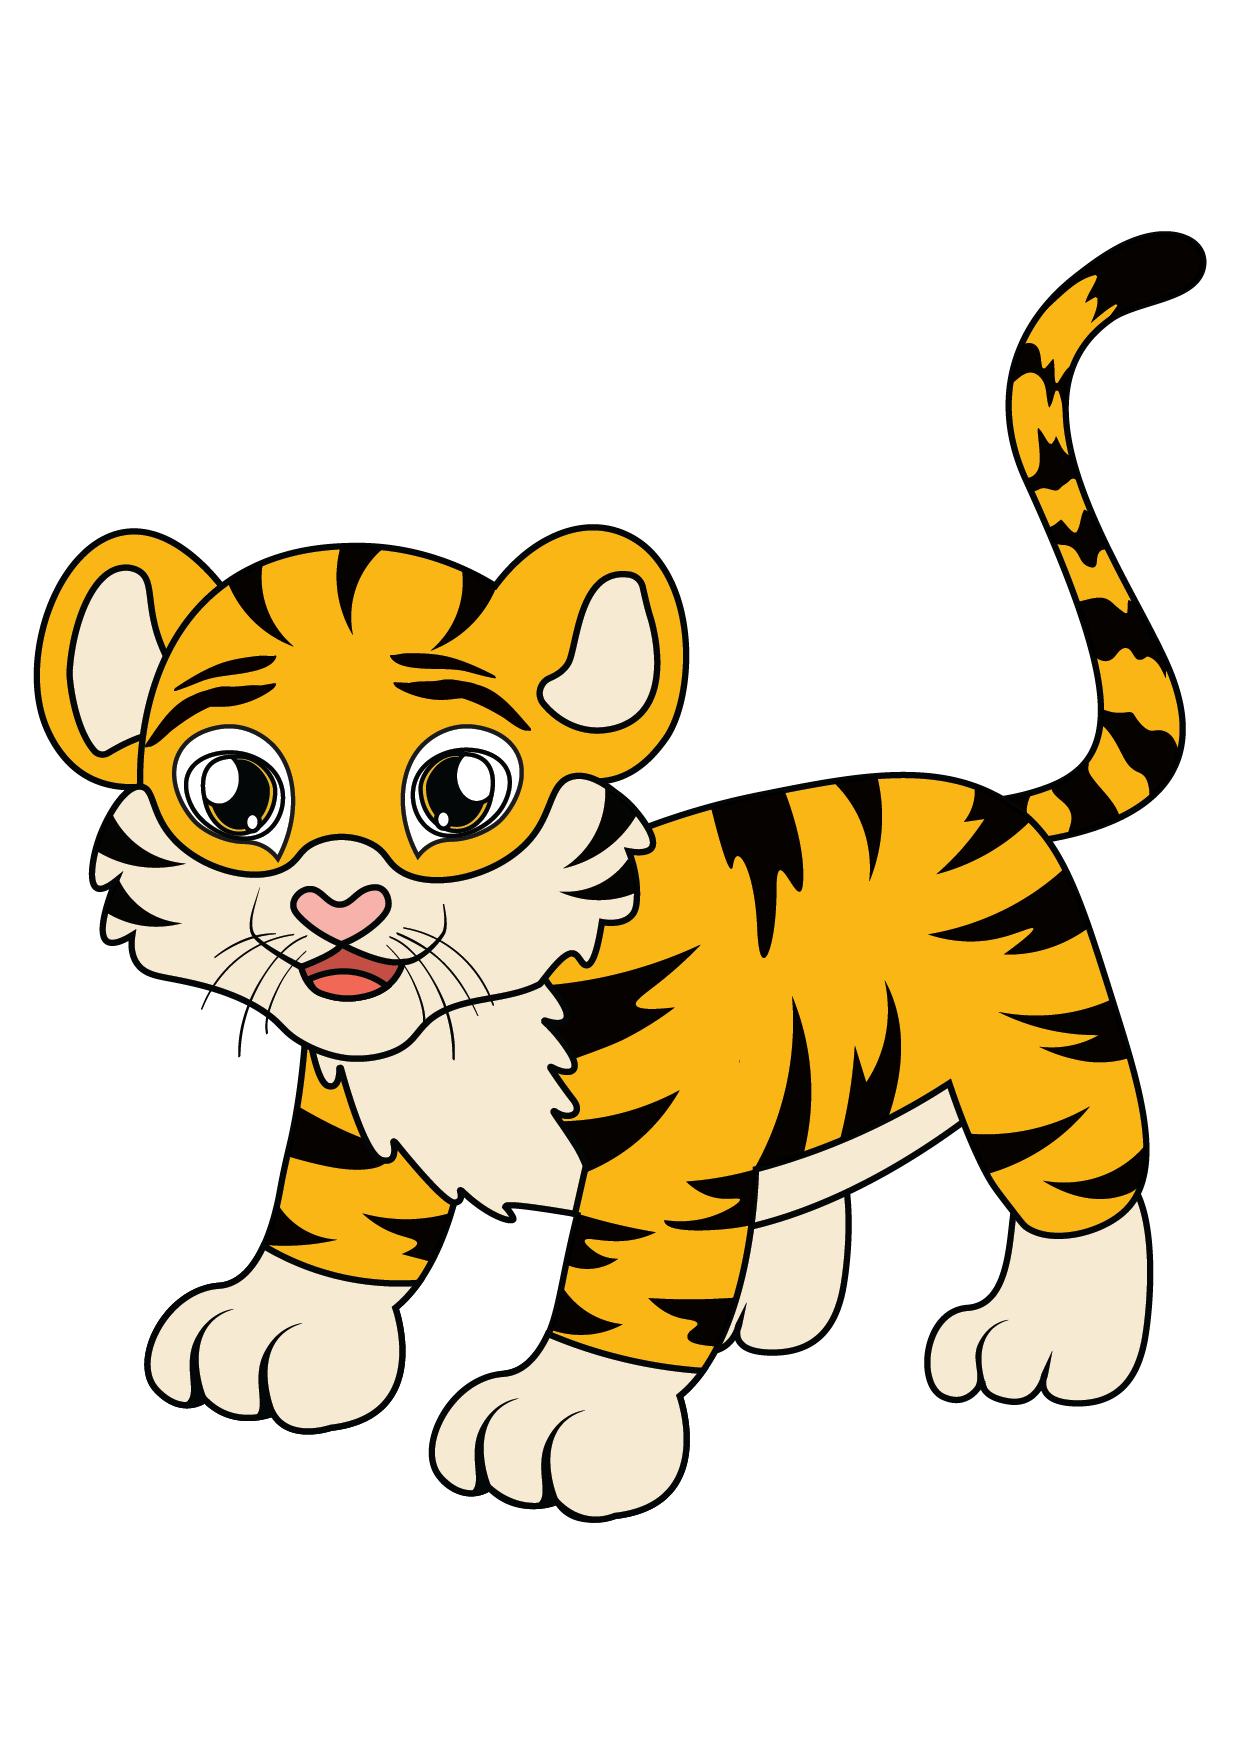 How to Draw A Tiger Step by Step Printable